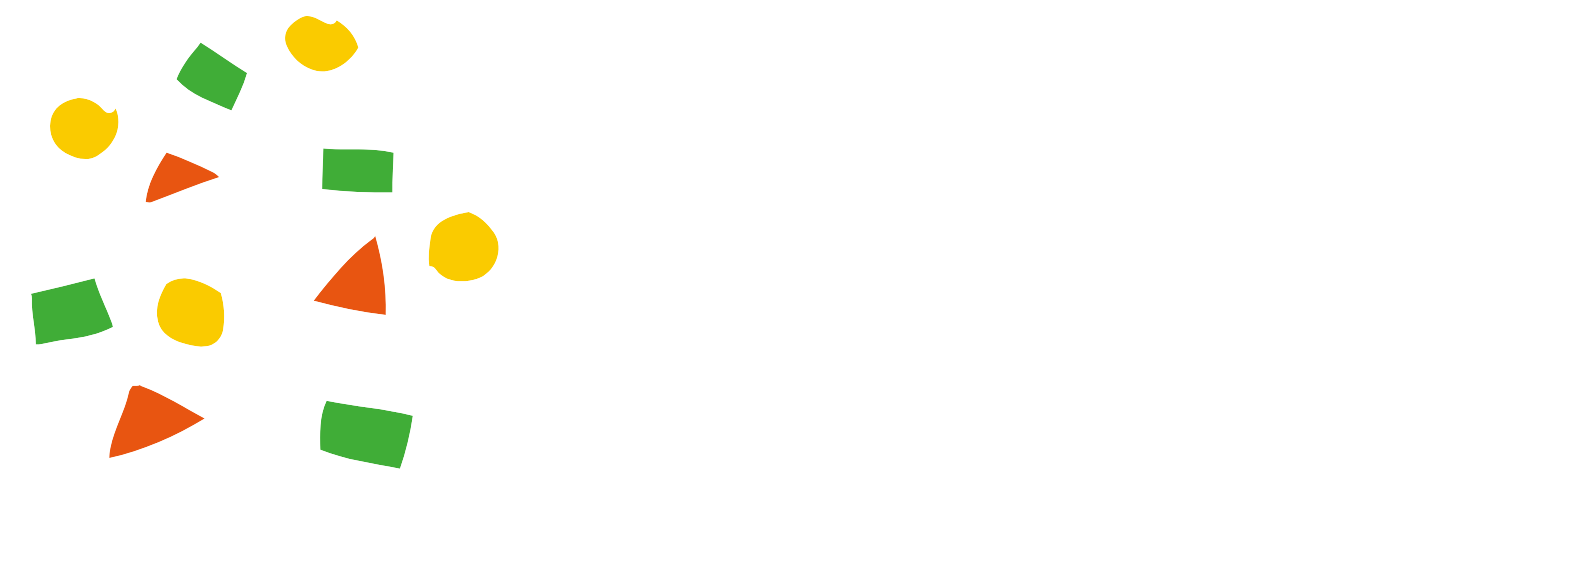 Accton Technology logo large for dark backgrounds (transparent PNG)